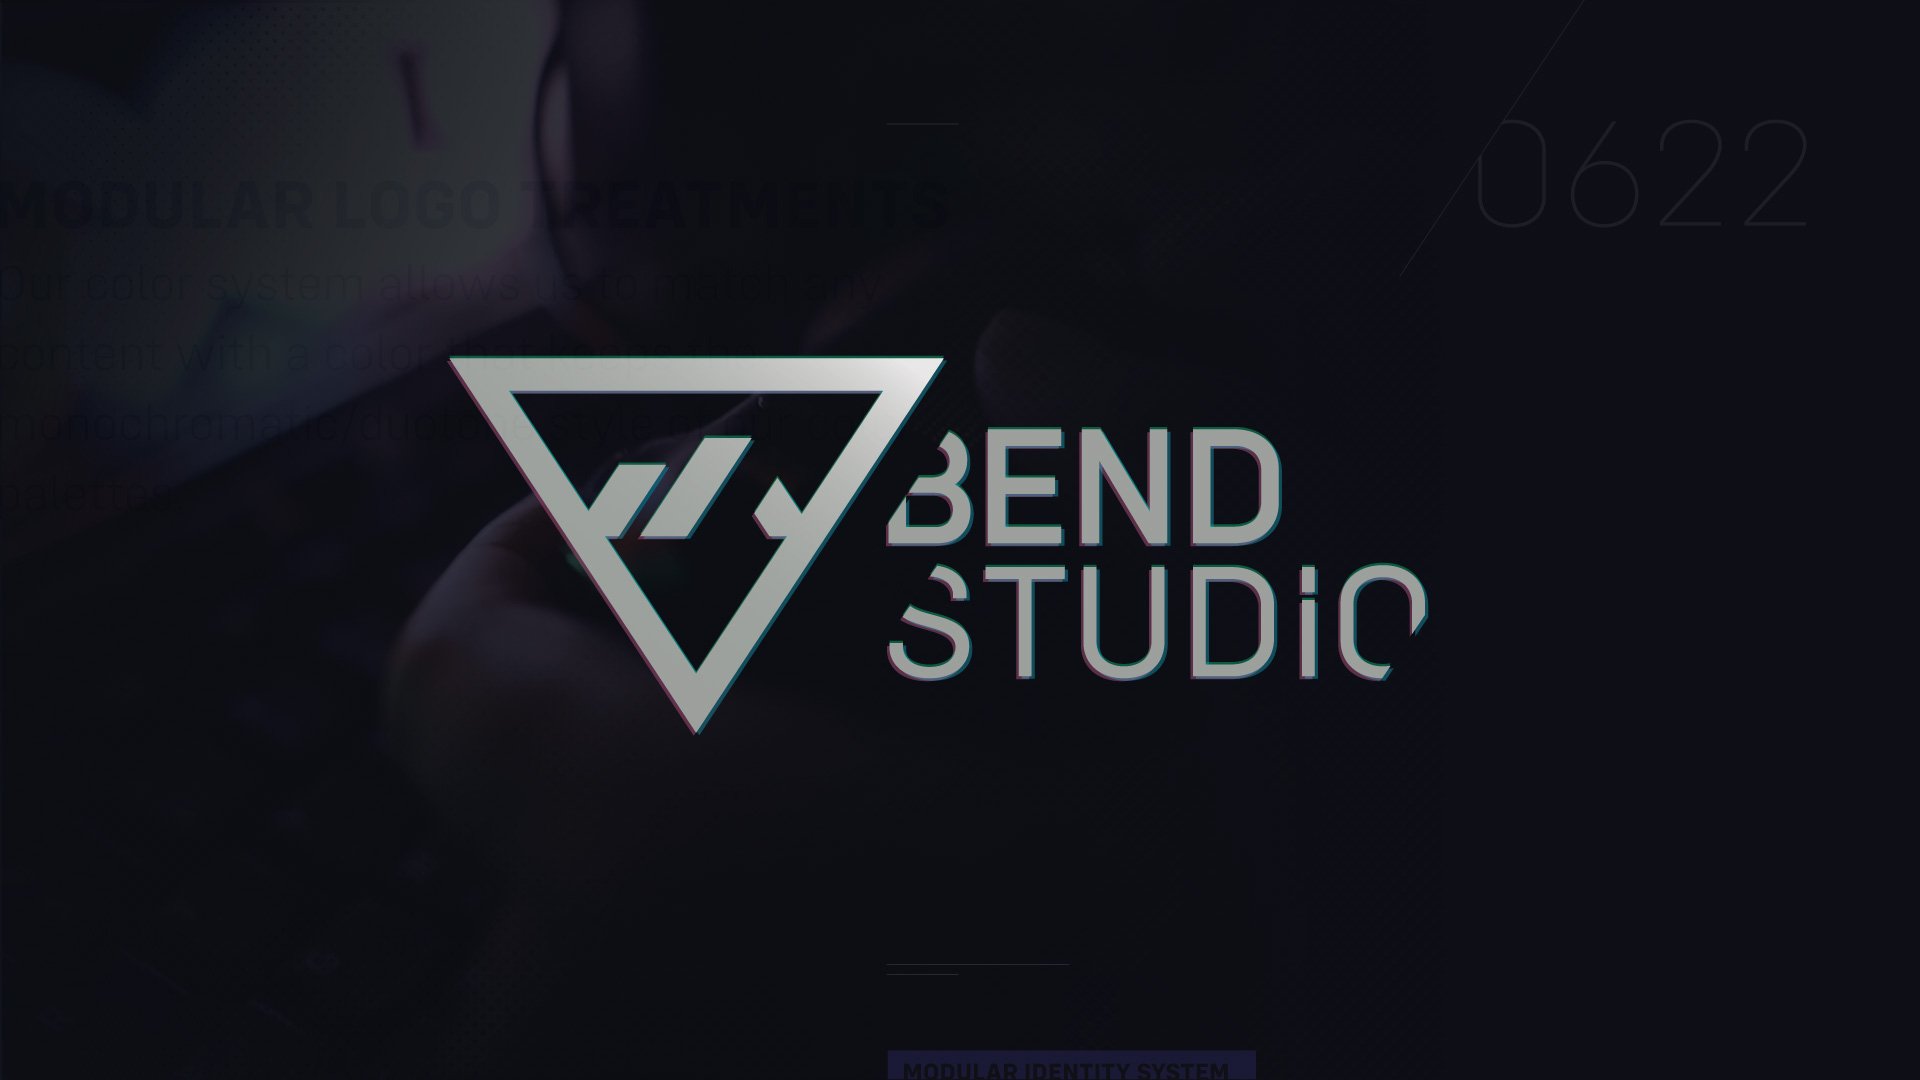 #
      Bend Studio unveils new logo, teases new open-world IP with multiplayer elements